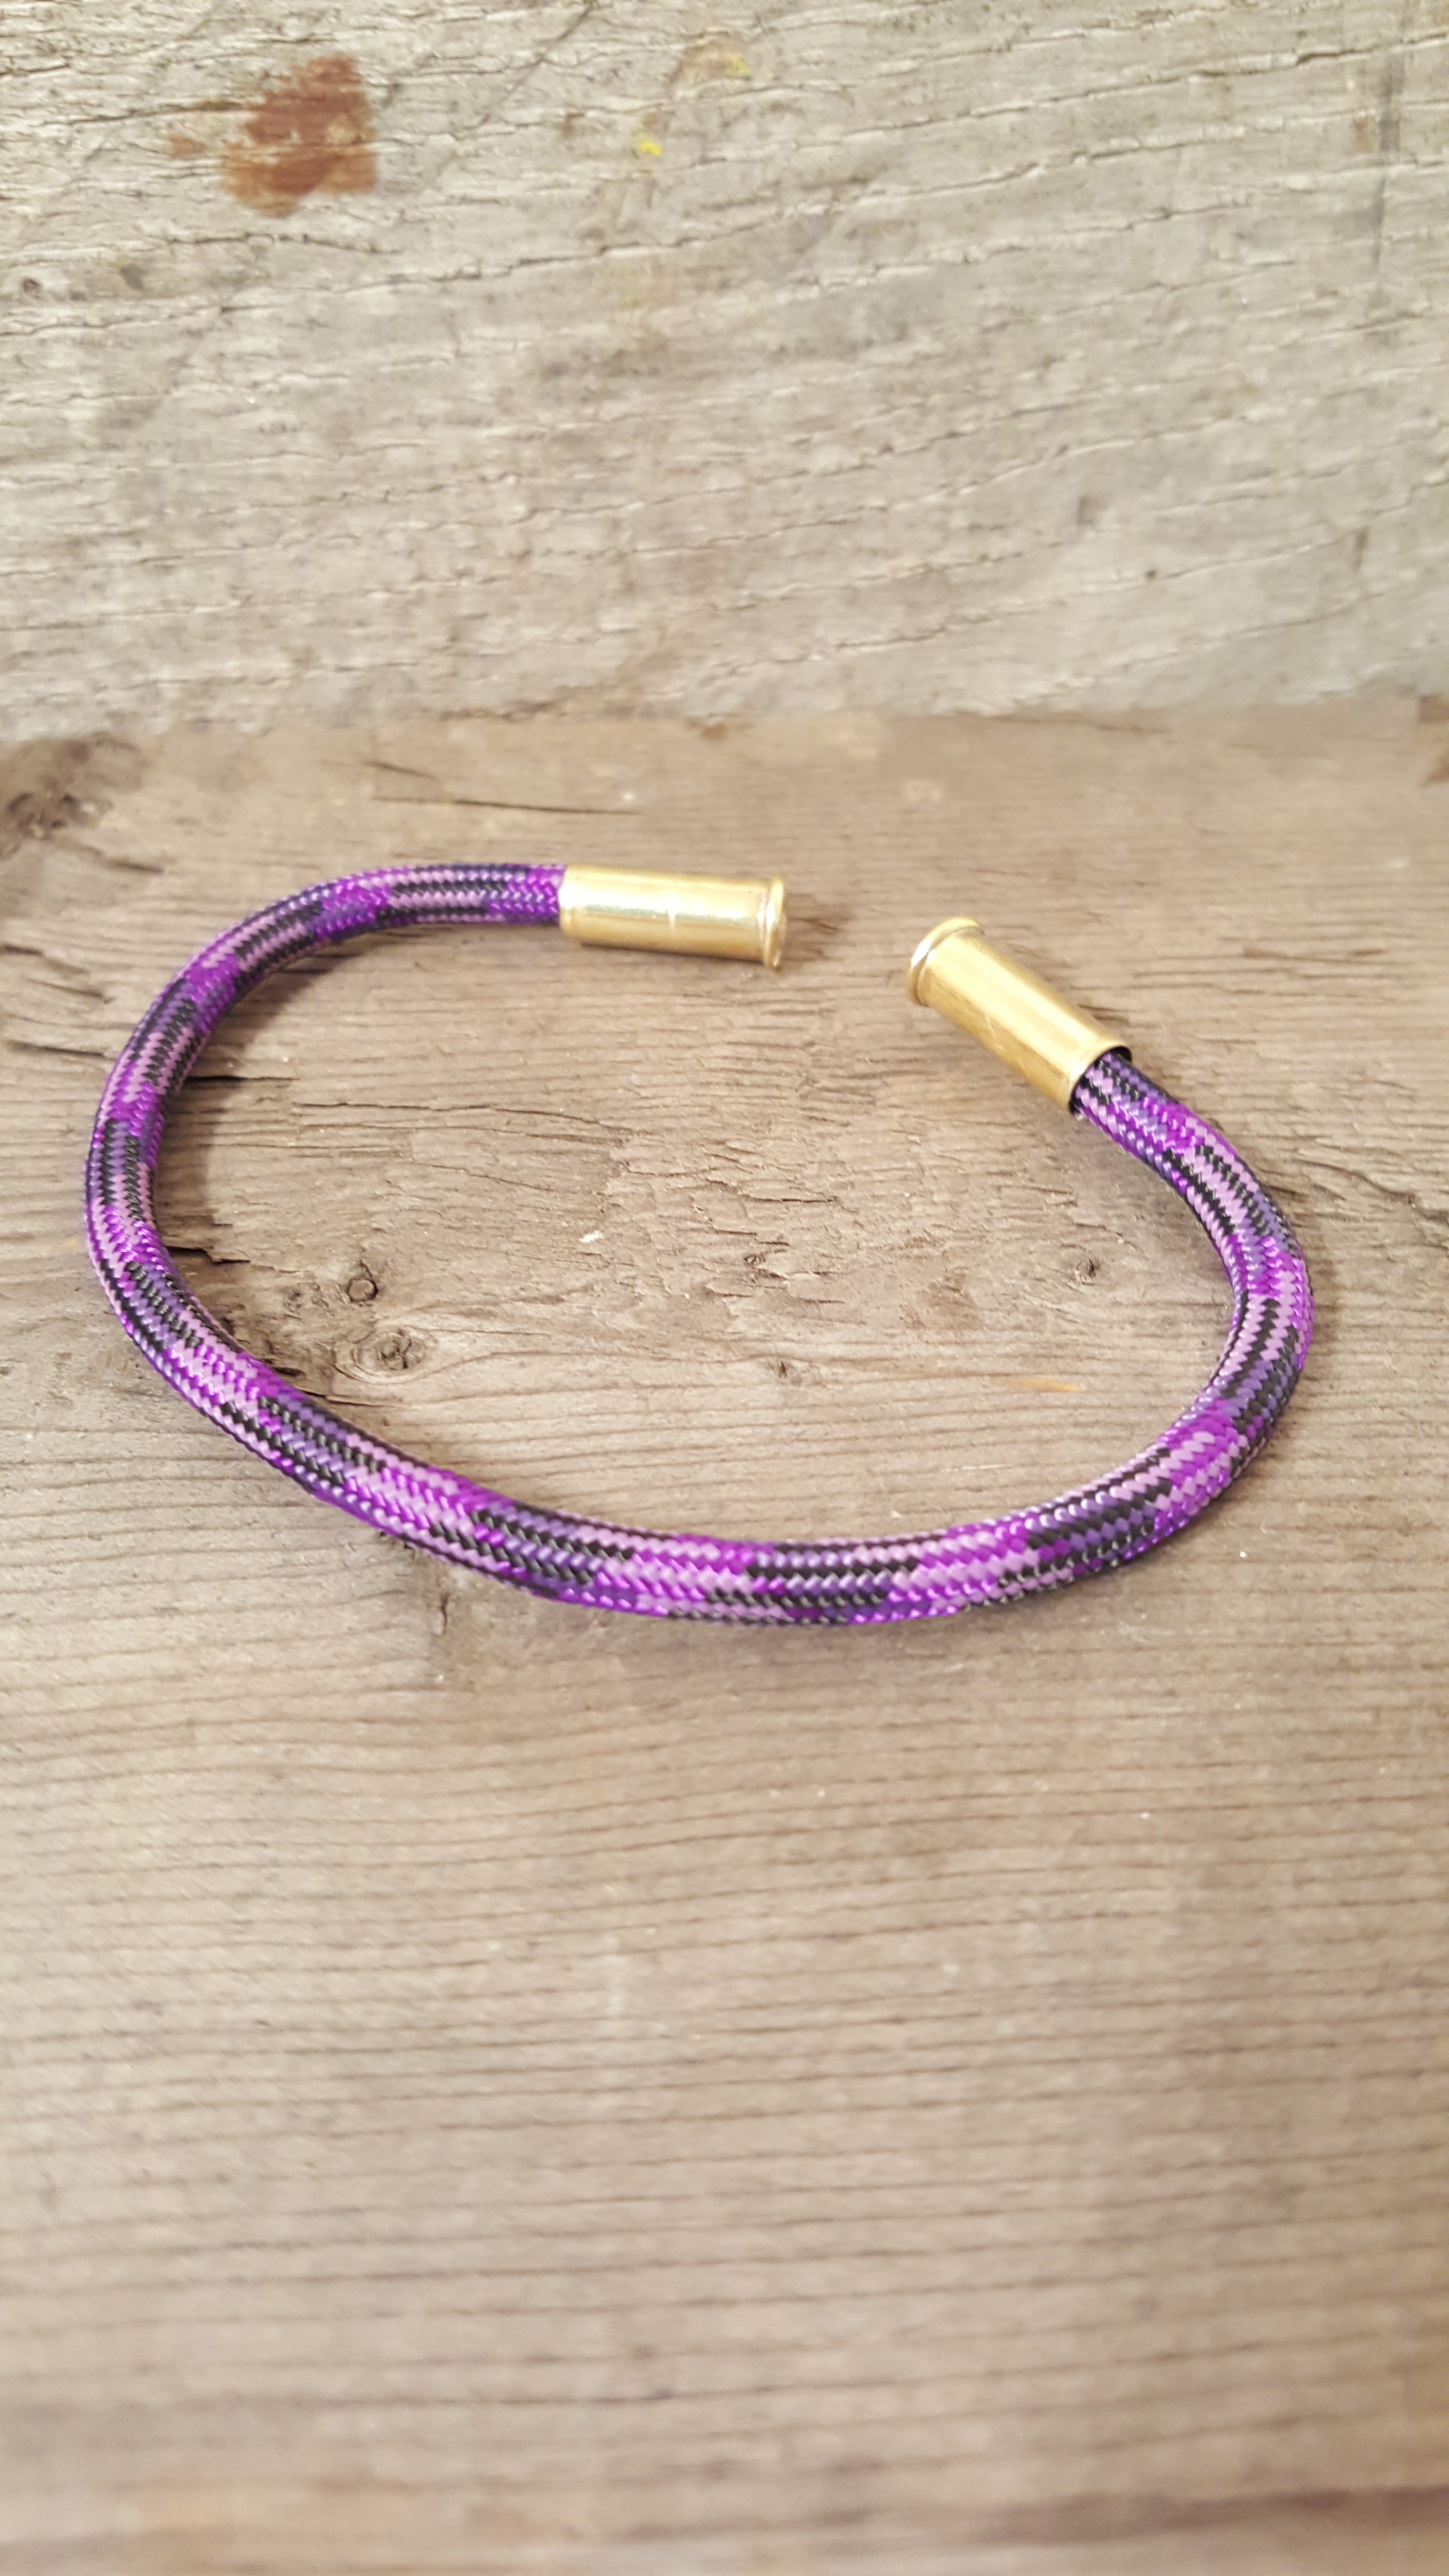 Thin style Paracord Ammo Bracelet Purple Black 22 LR bullet castings Great 4 Gals and Guys